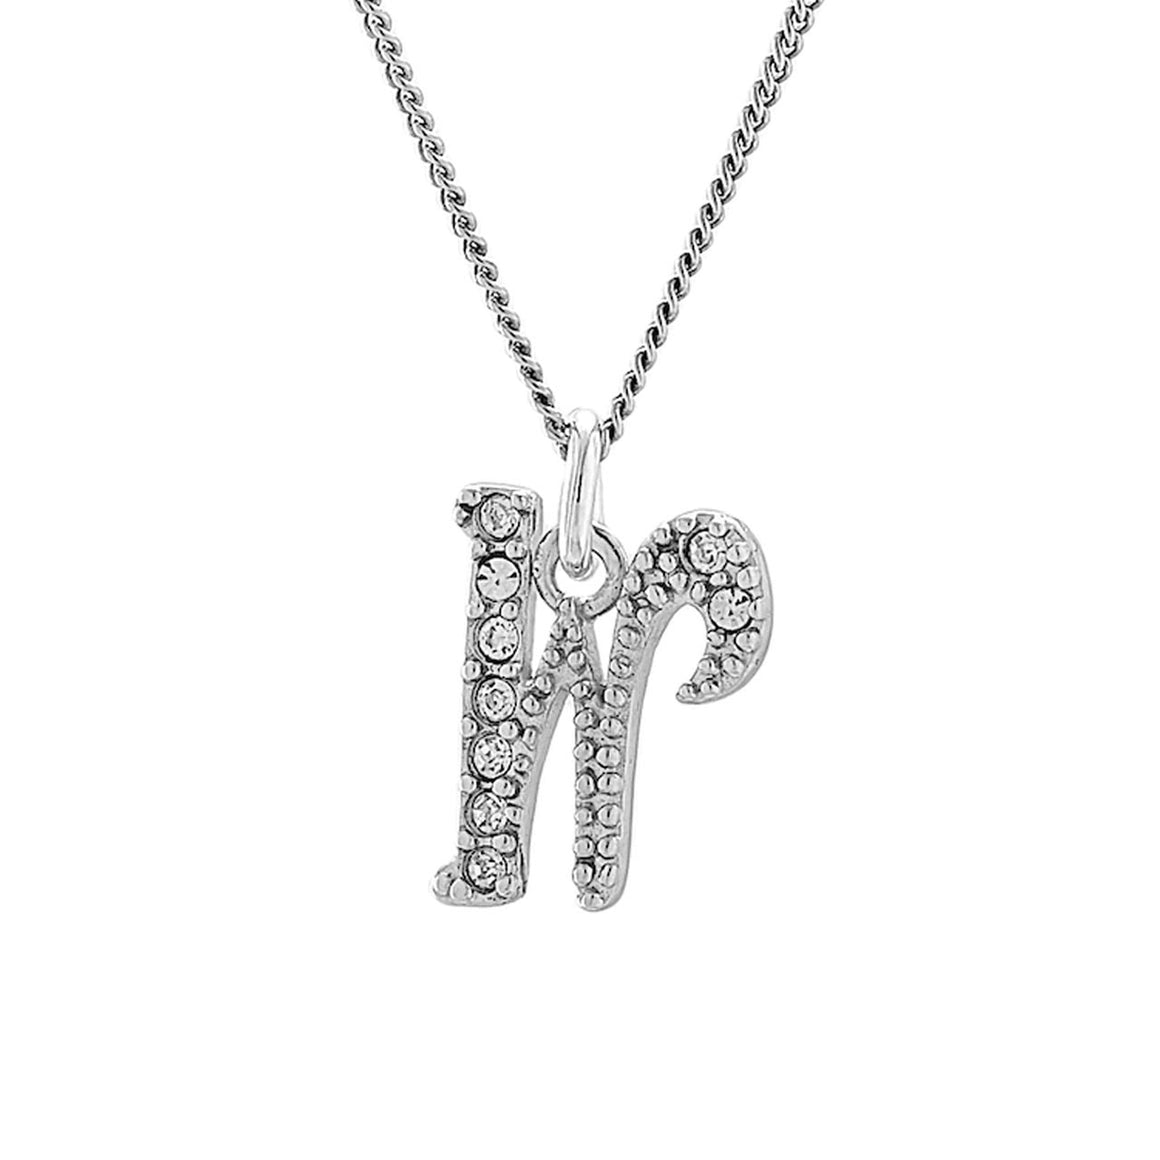 Cubic Zirconia Initial Pendant with 18" Chain - "W"